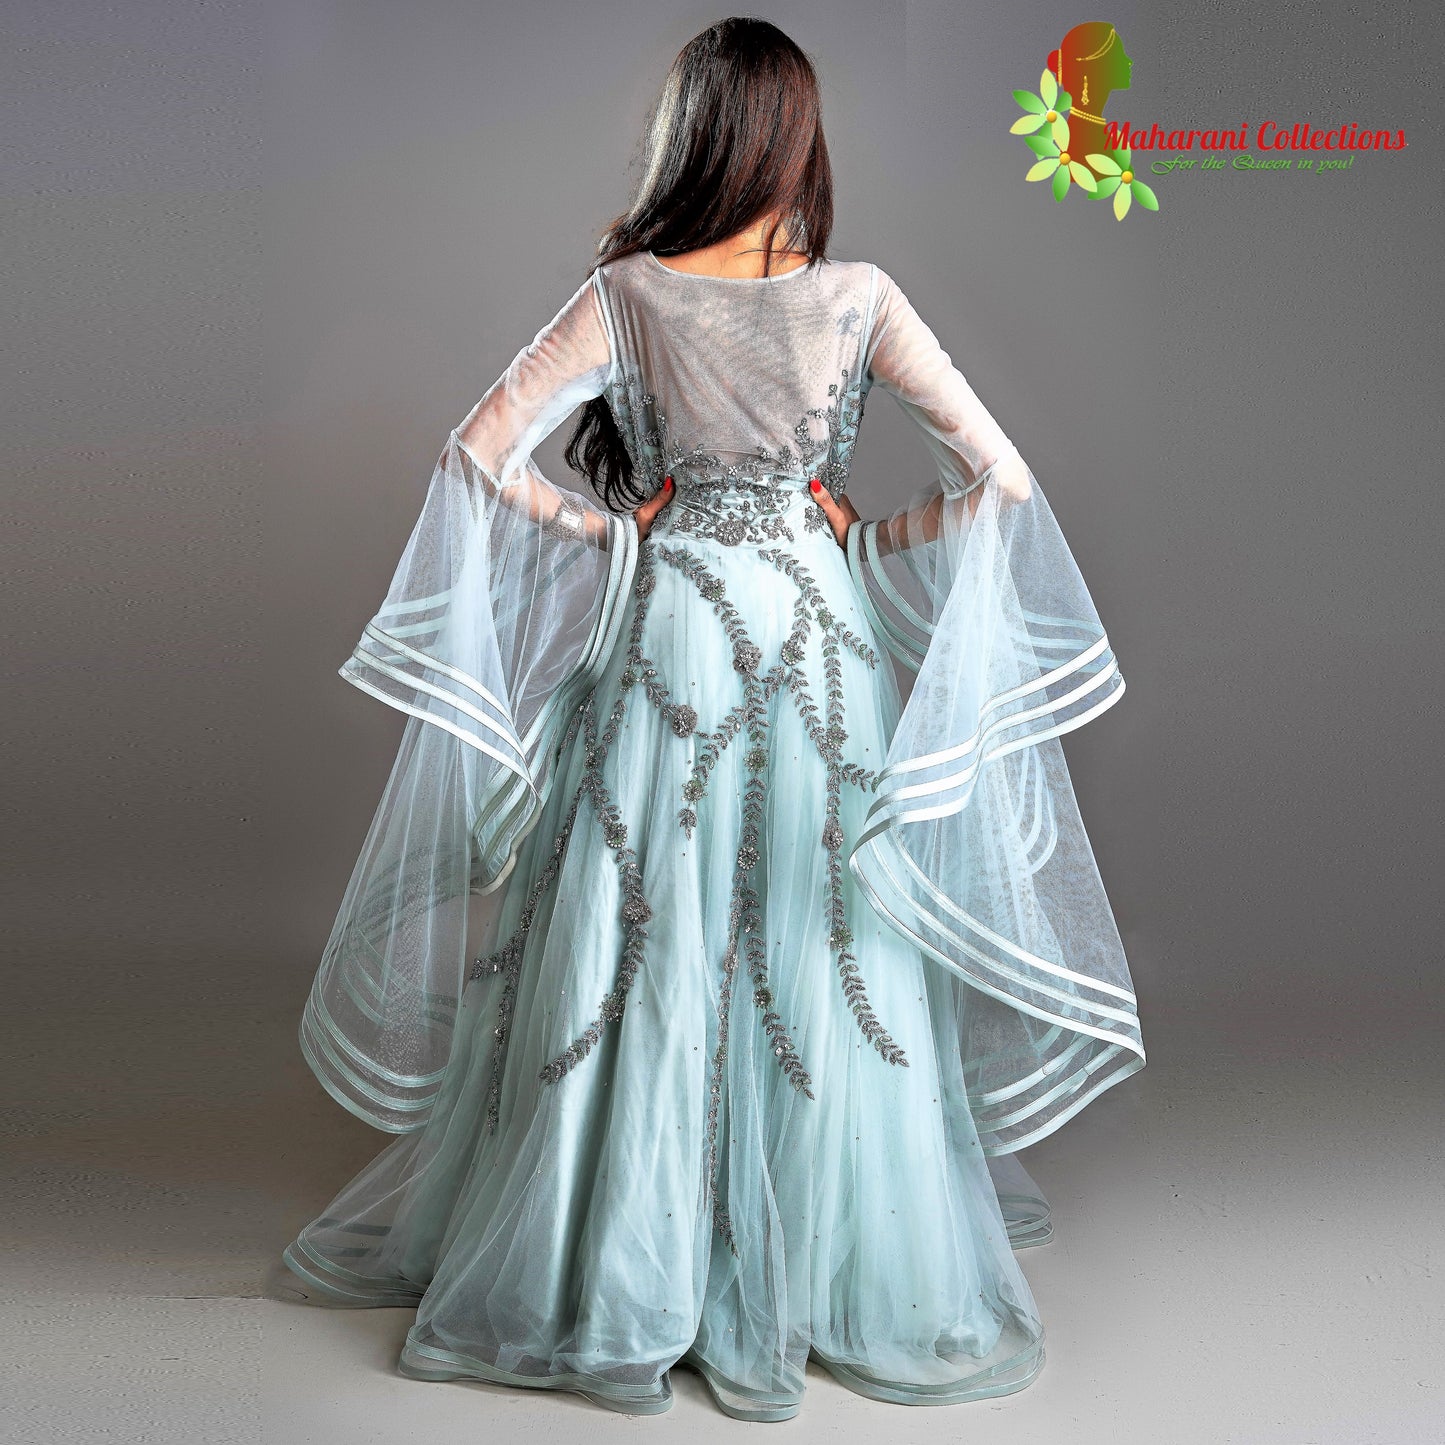 Designer Ball (Princess) Gown - Light Sea Green with Net, Beads, Sequins and Thread Work